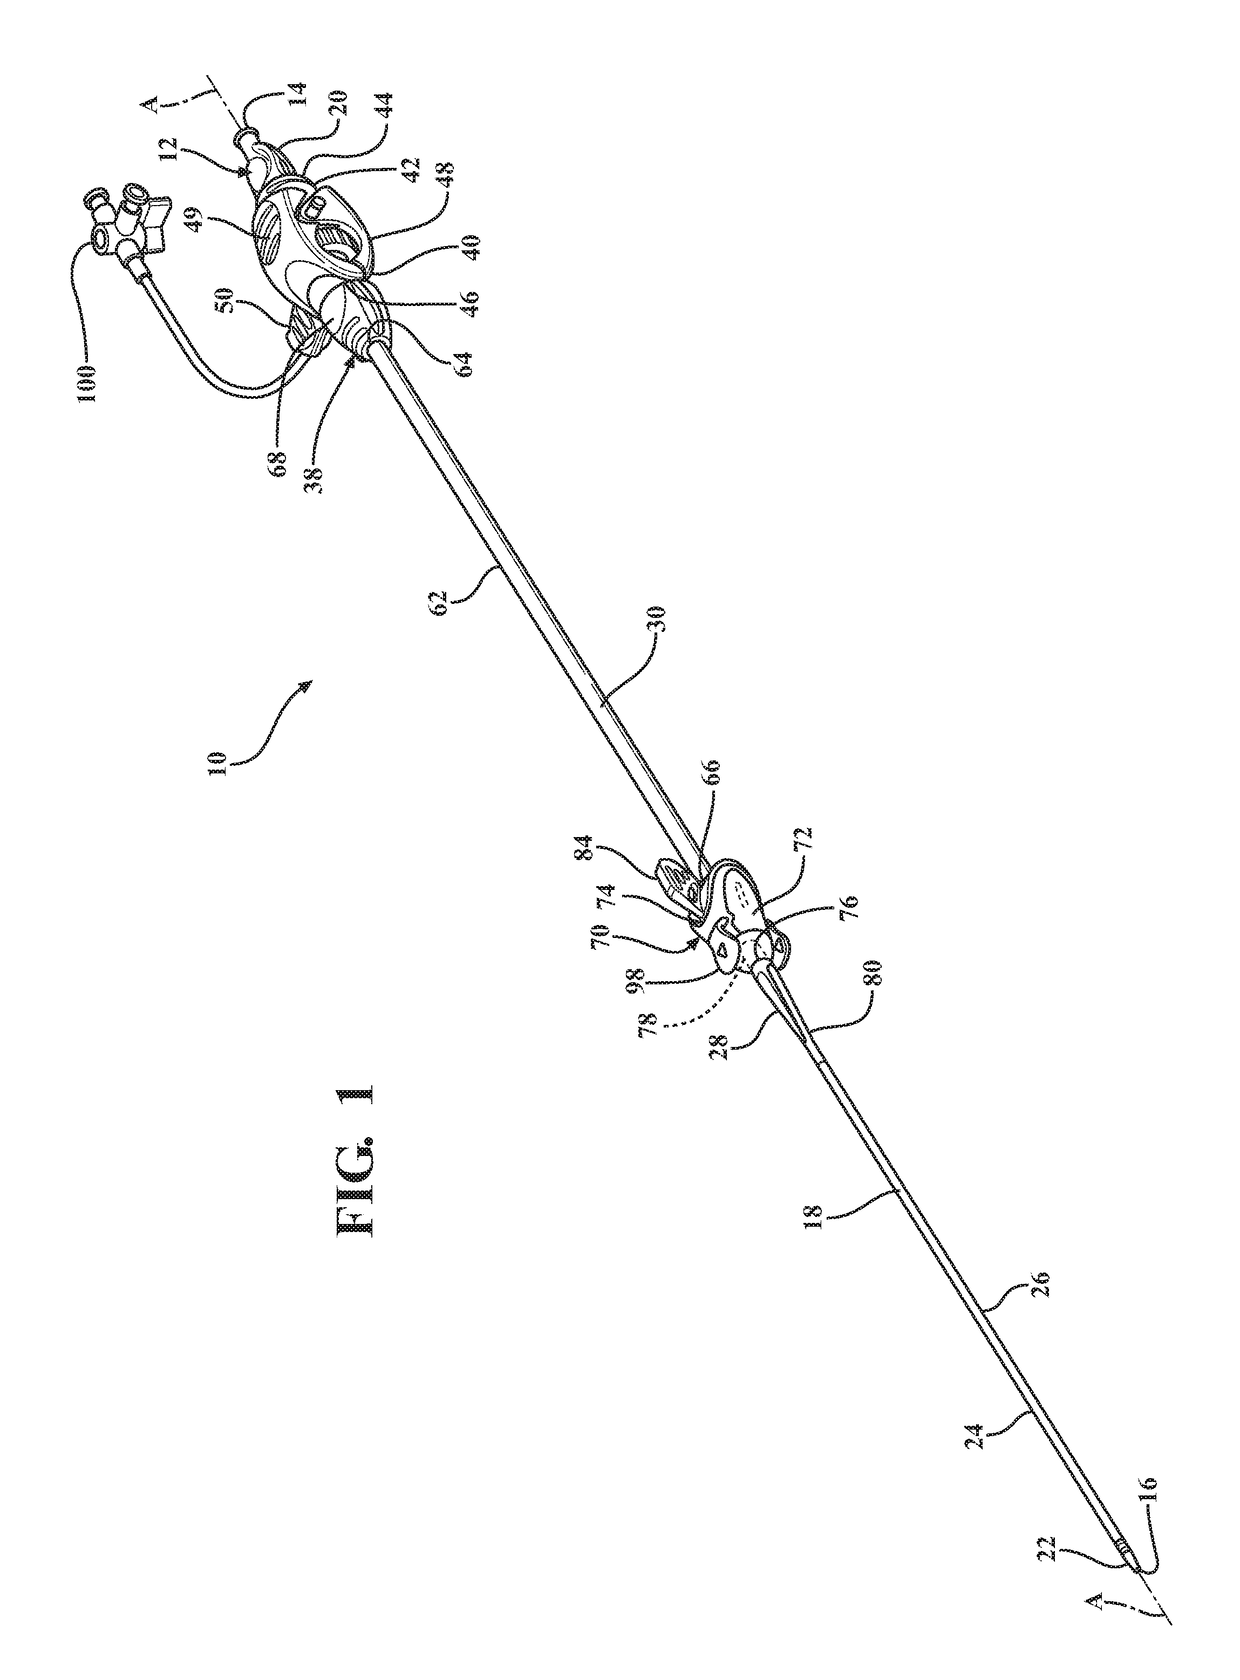 Expandable introducer assembly and method of using same